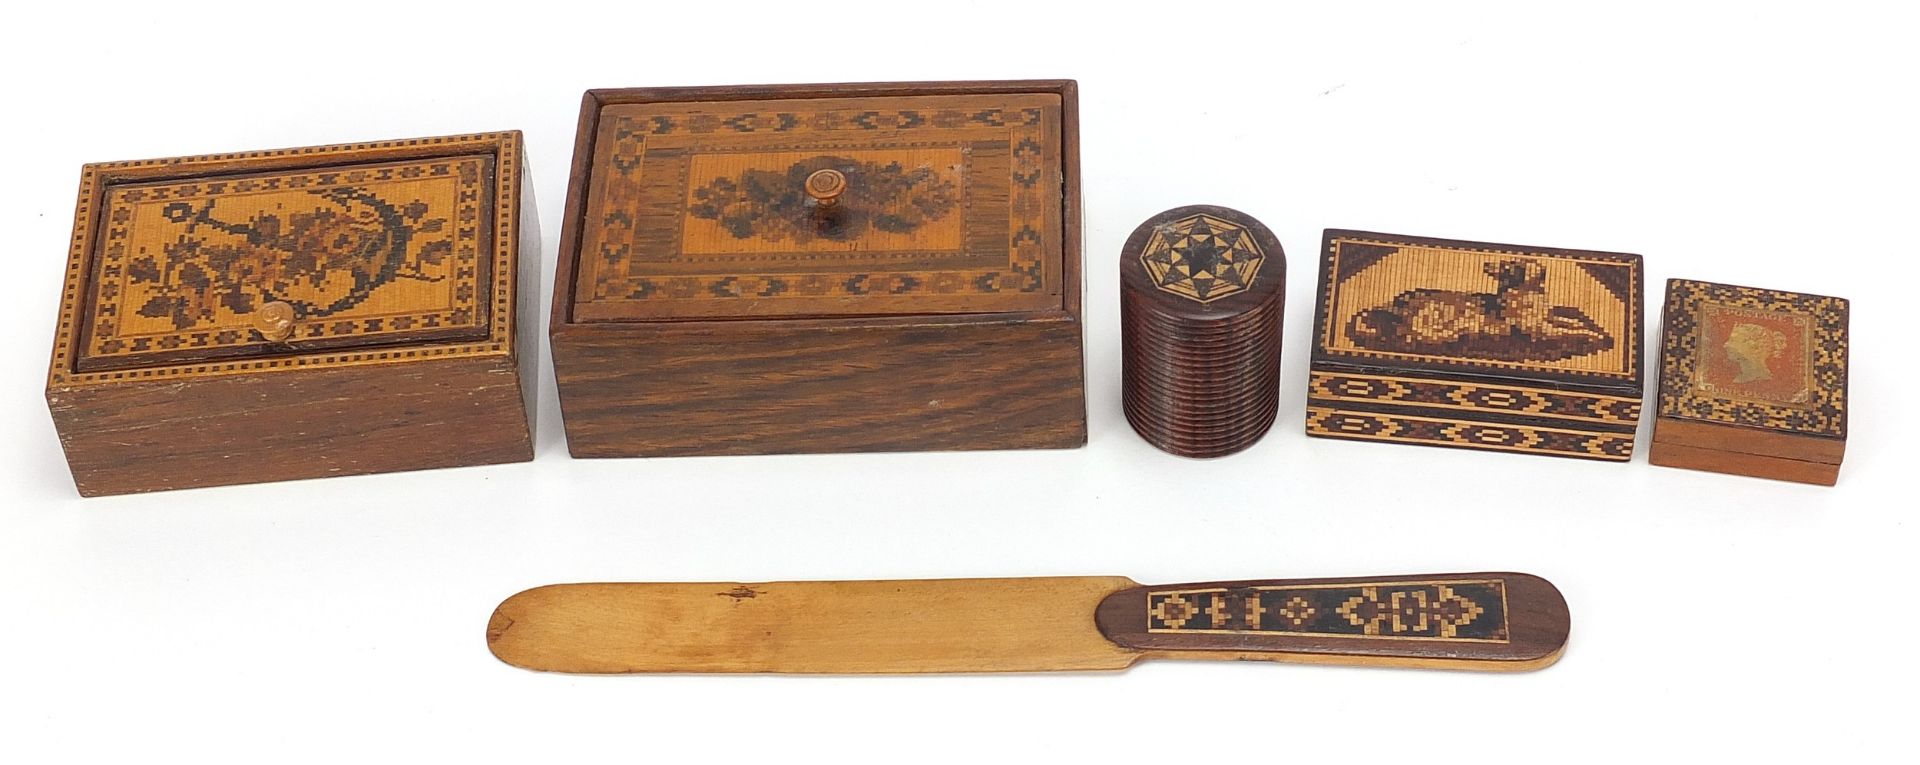 Victorian Tunbridge ware including a rosewood box inlaid with a dog, stamp box with penny red and